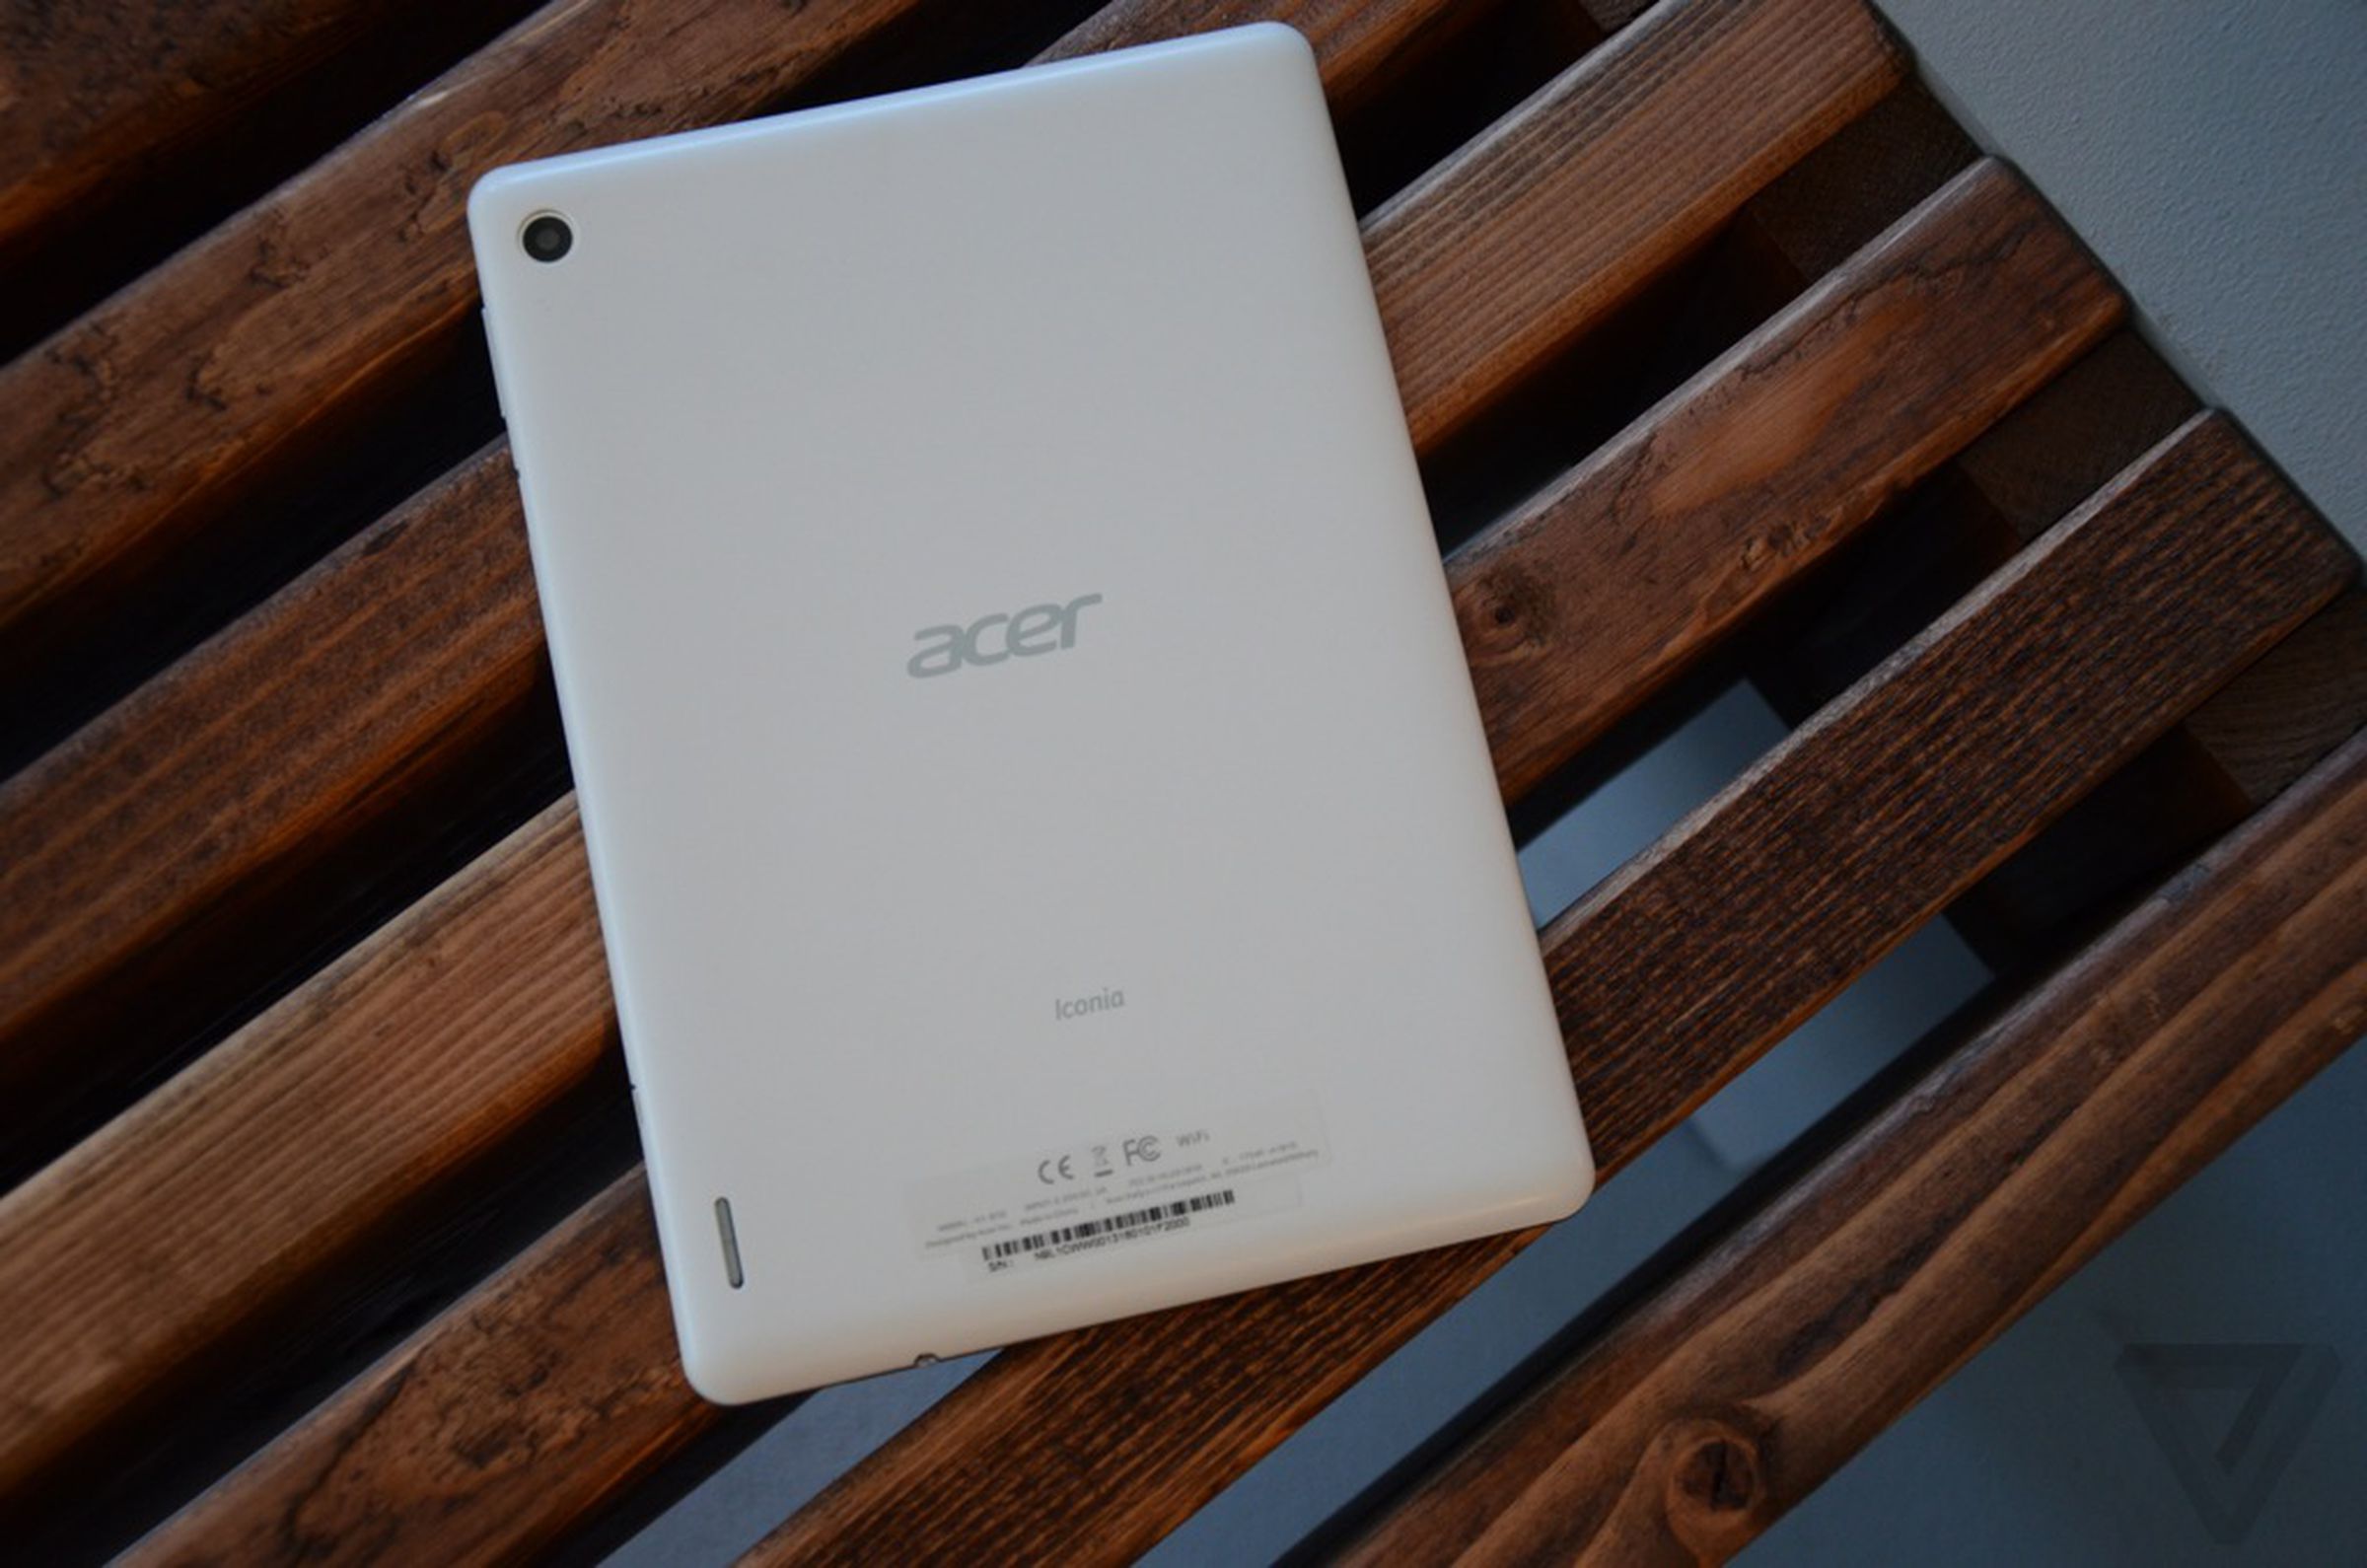 Acer Iconia A1 hands-on pictures